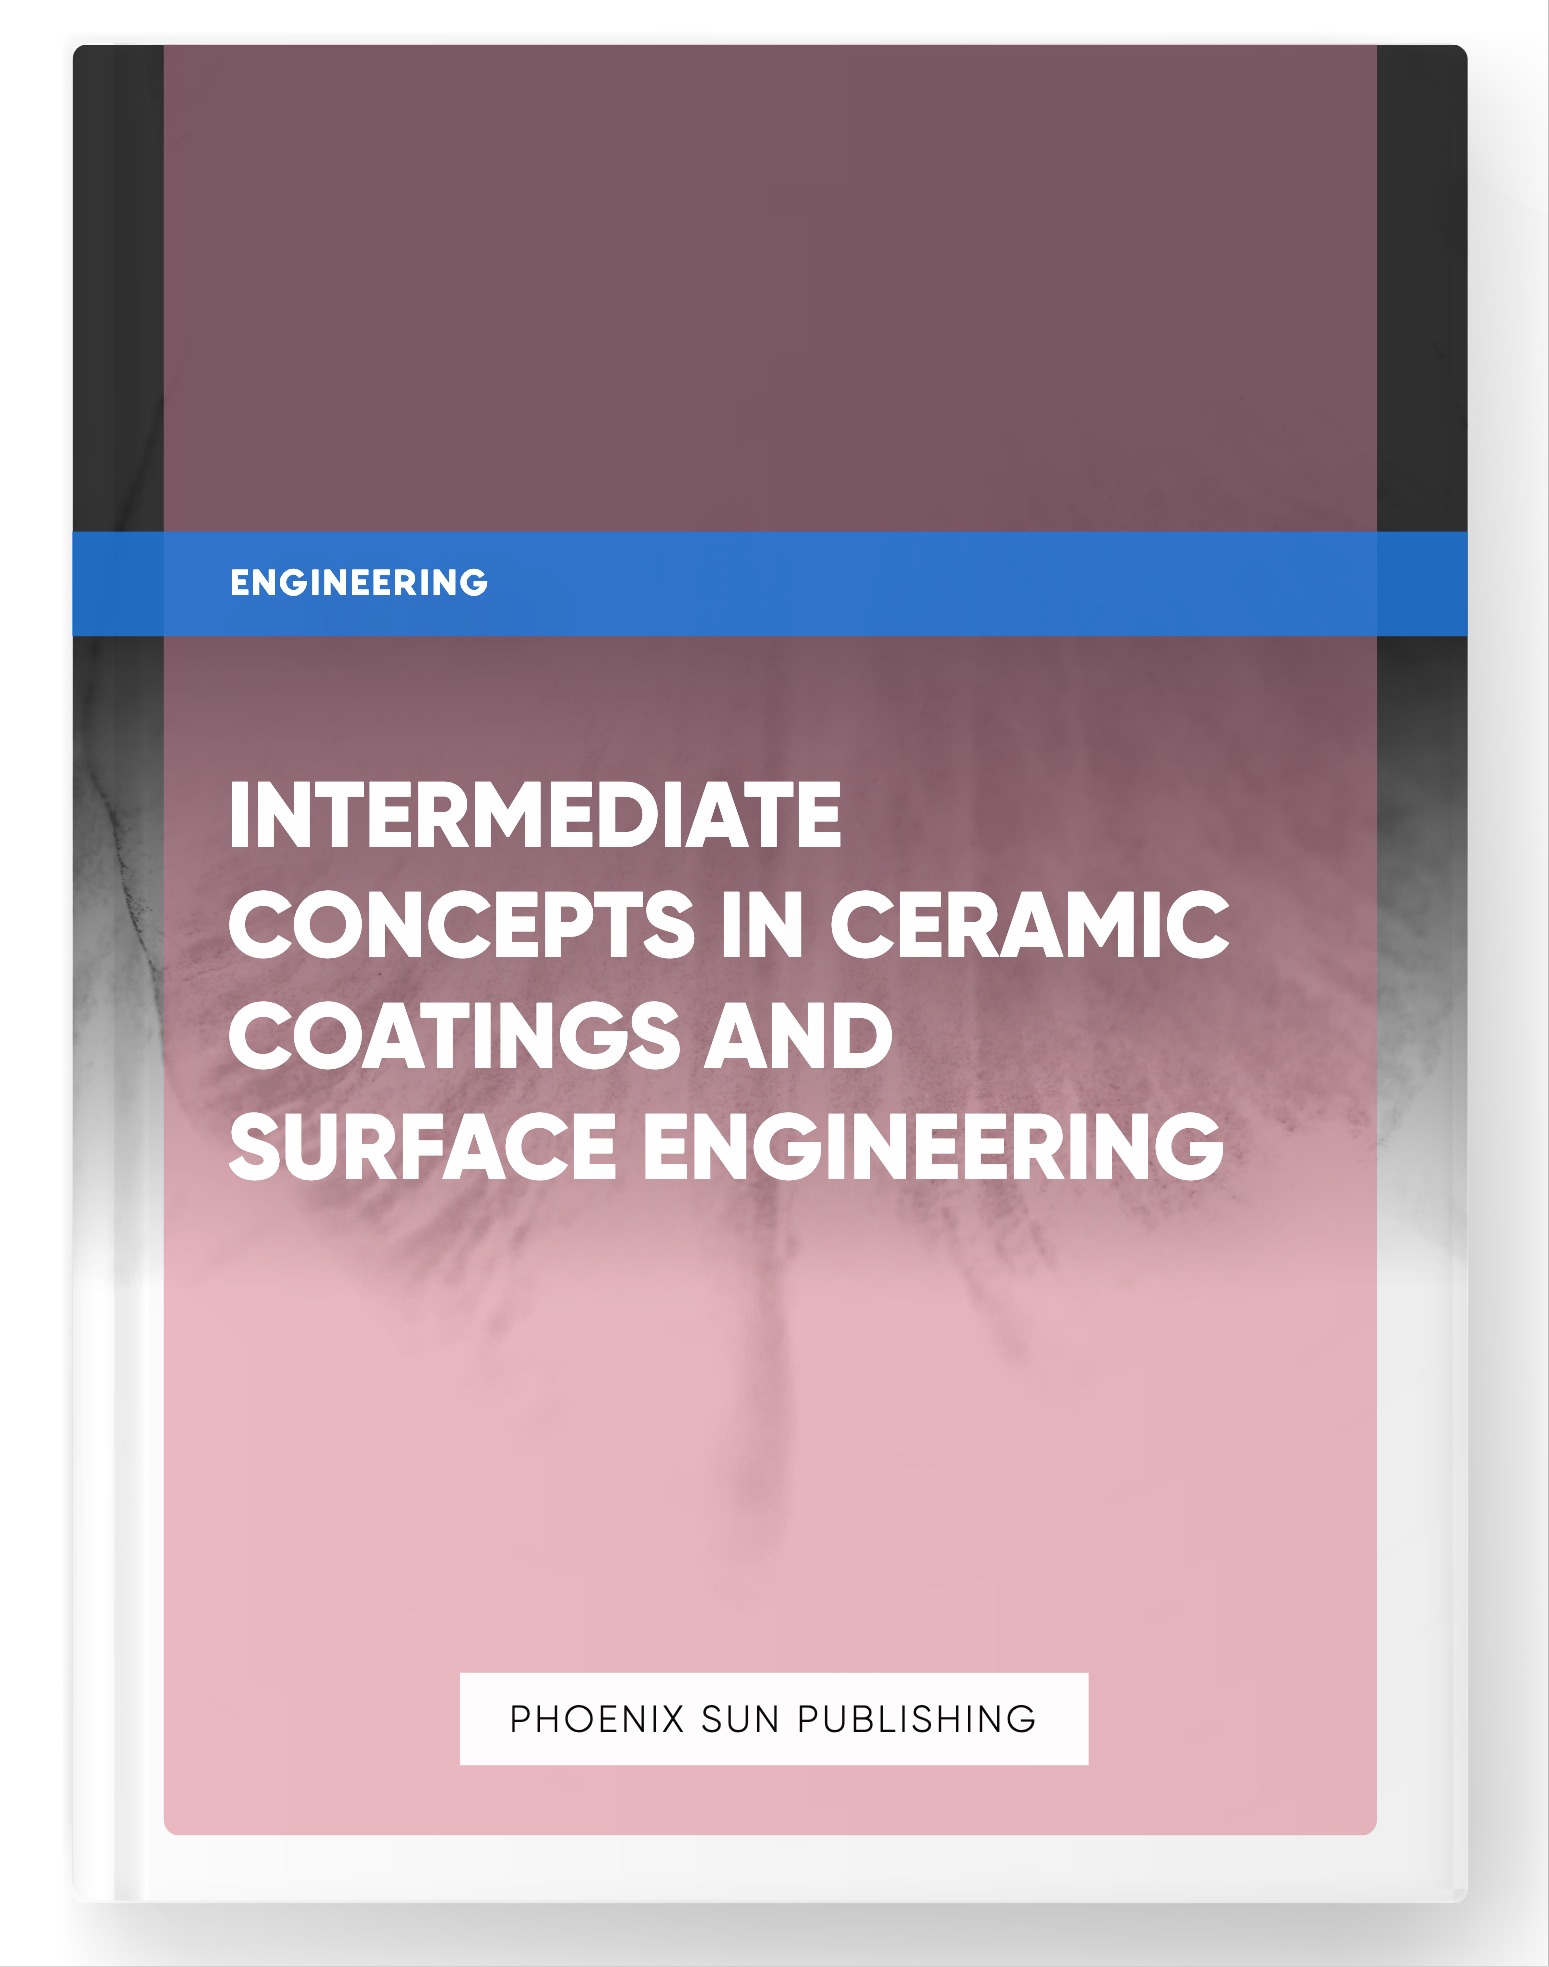 Intermediate Concepts in Ceramic Coatings and Surface Engineering